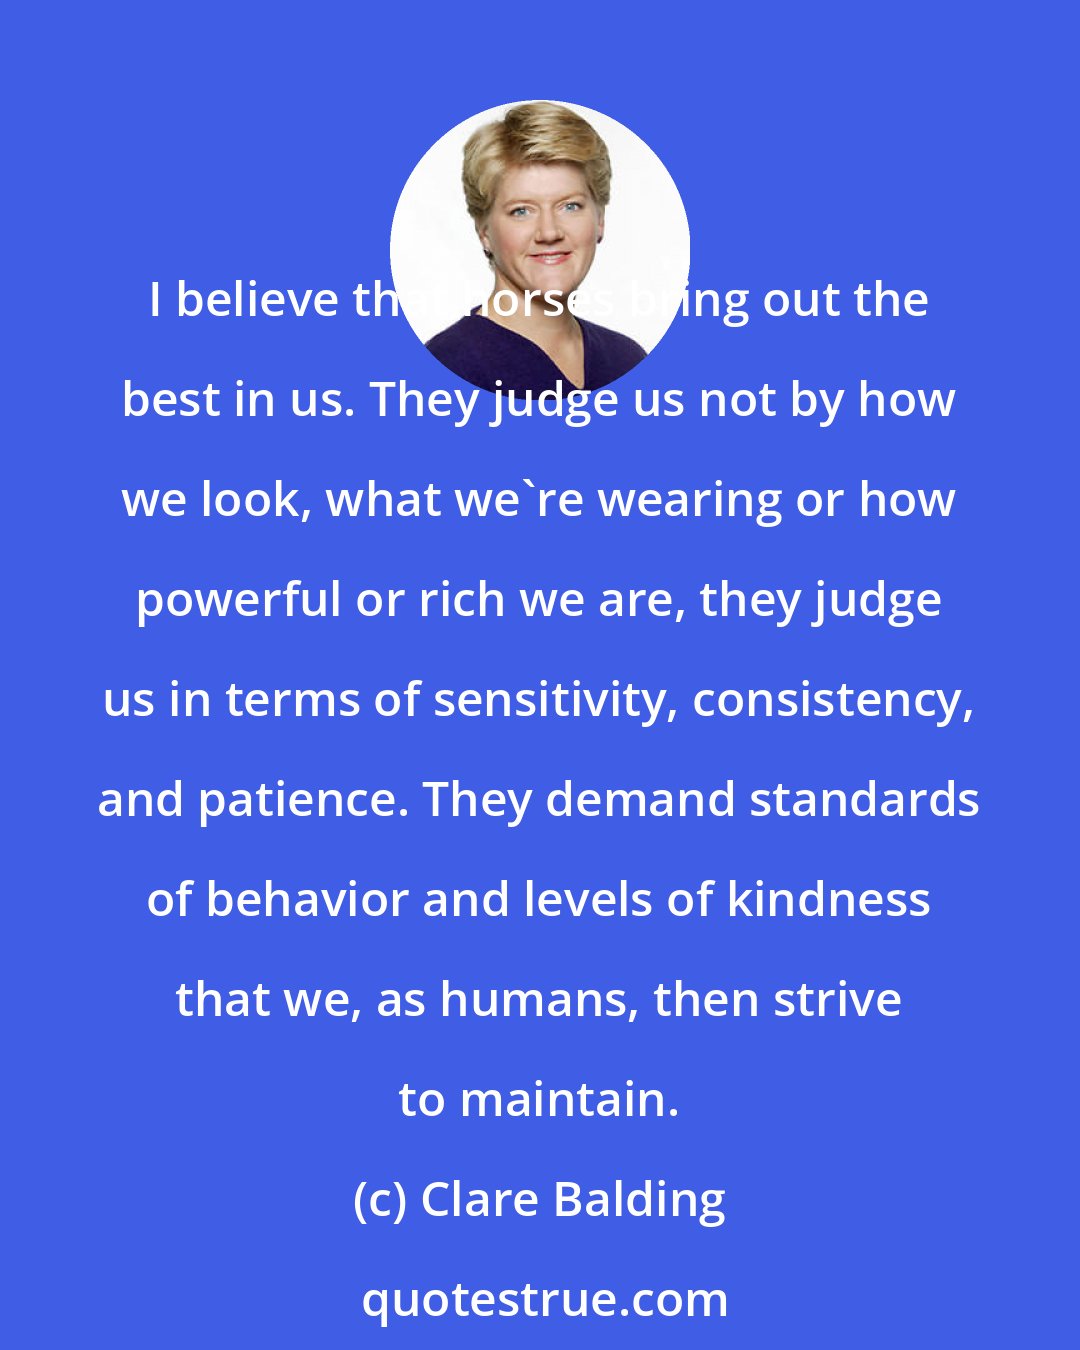 Clare Balding: I believe that horses bring out the best in us. They judge us not by how we look, what we're wearing or how powerful or rich we are, they judge us in terms of sensitivity, consistency, and patience. They demand standards of behavior and levels of kindness that we, as humans, then strive to maintain.